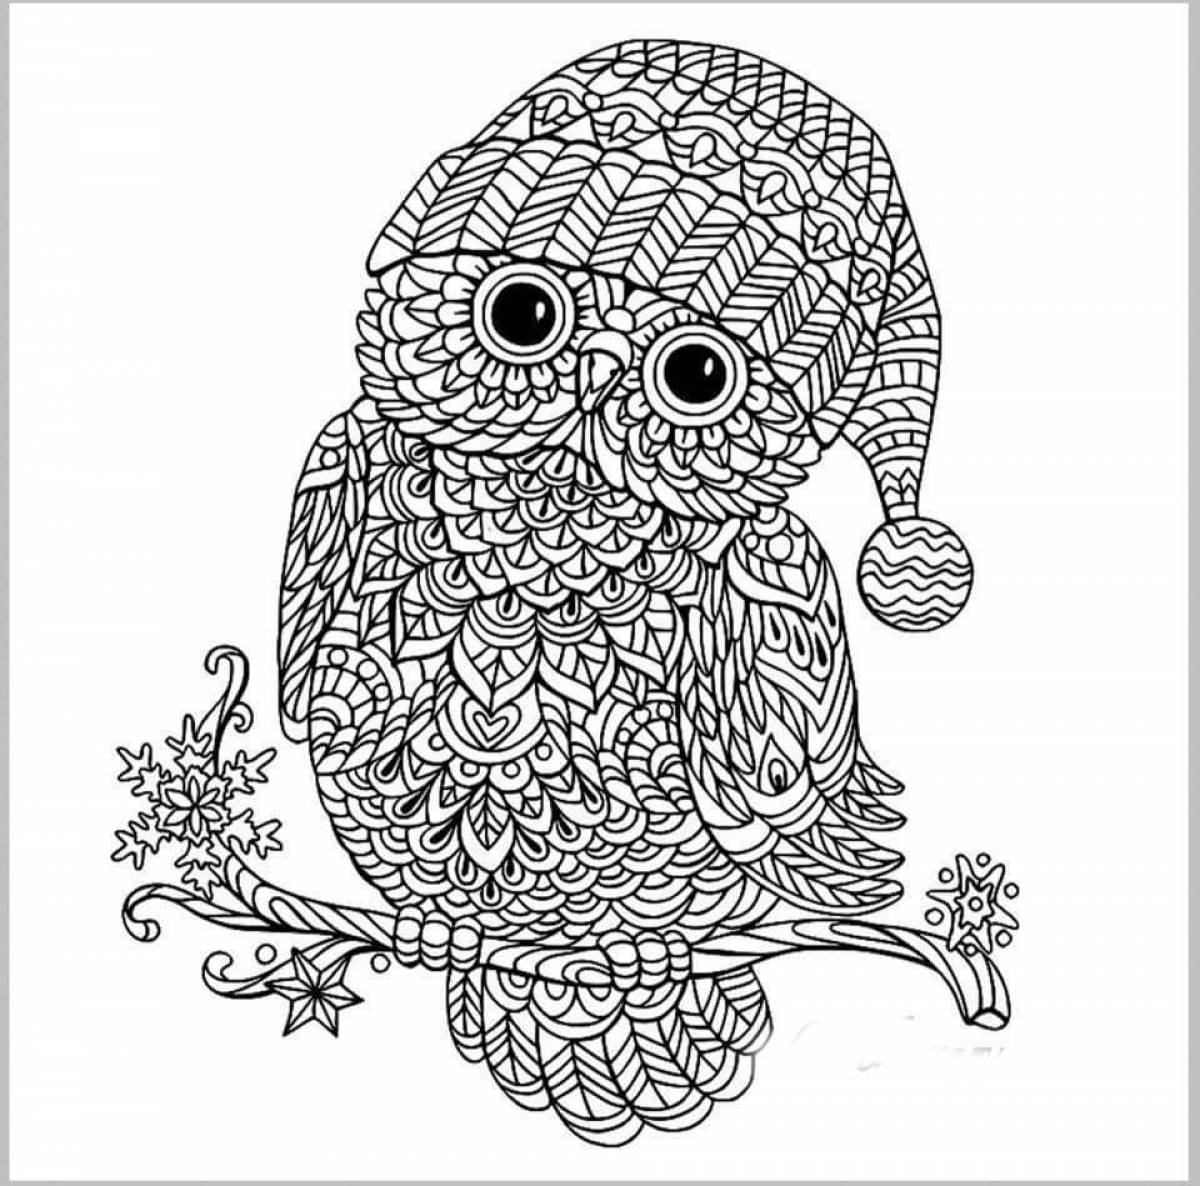 Owl antistress coloring page